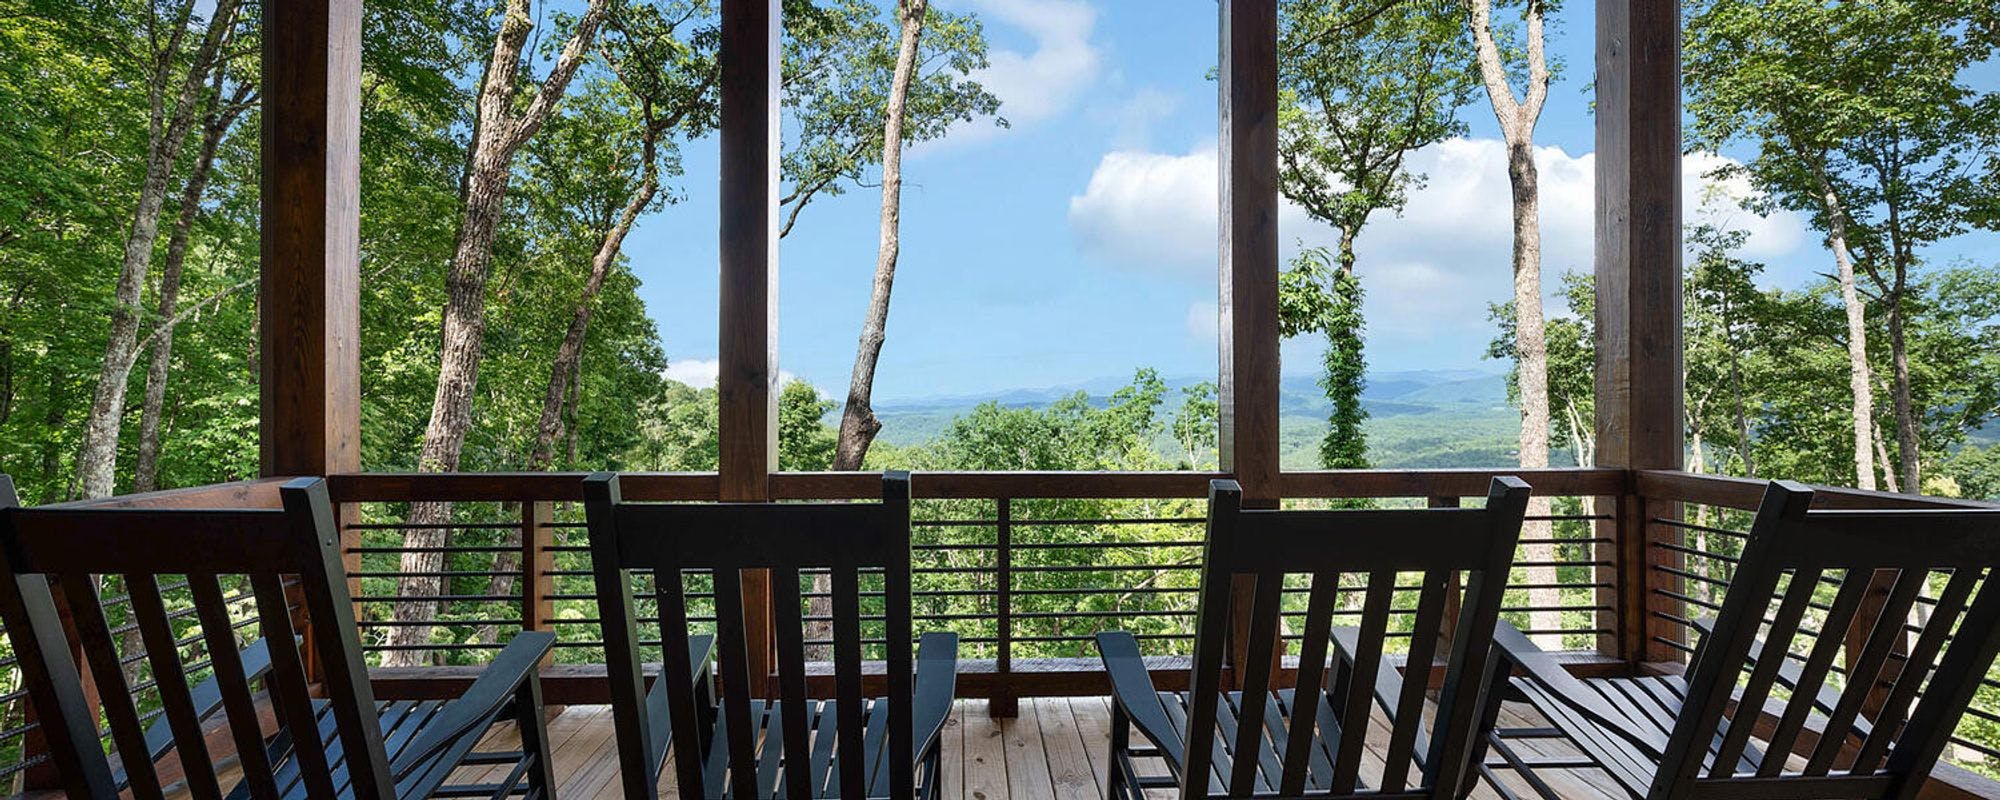 Rocking chairs with view at Southern Comfort Cabin Rentals vacation rental